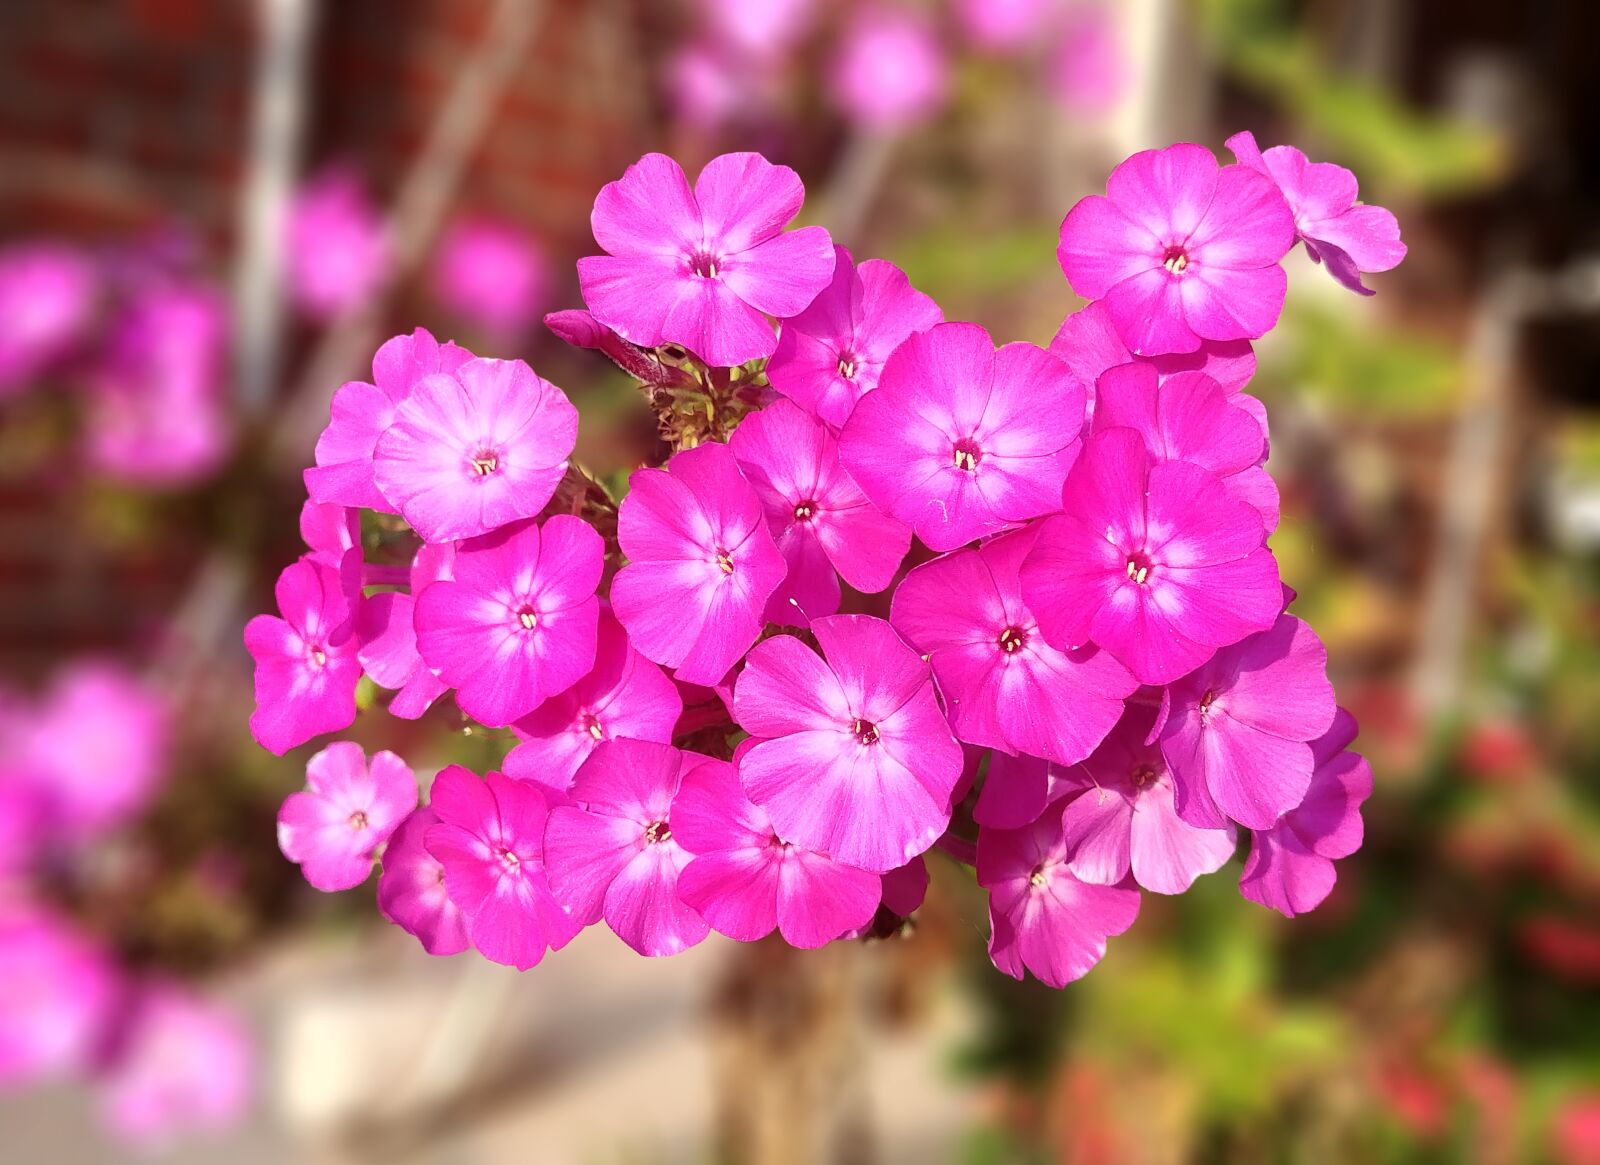 LG G6 sample photo. Phlox, after so, flowers photography